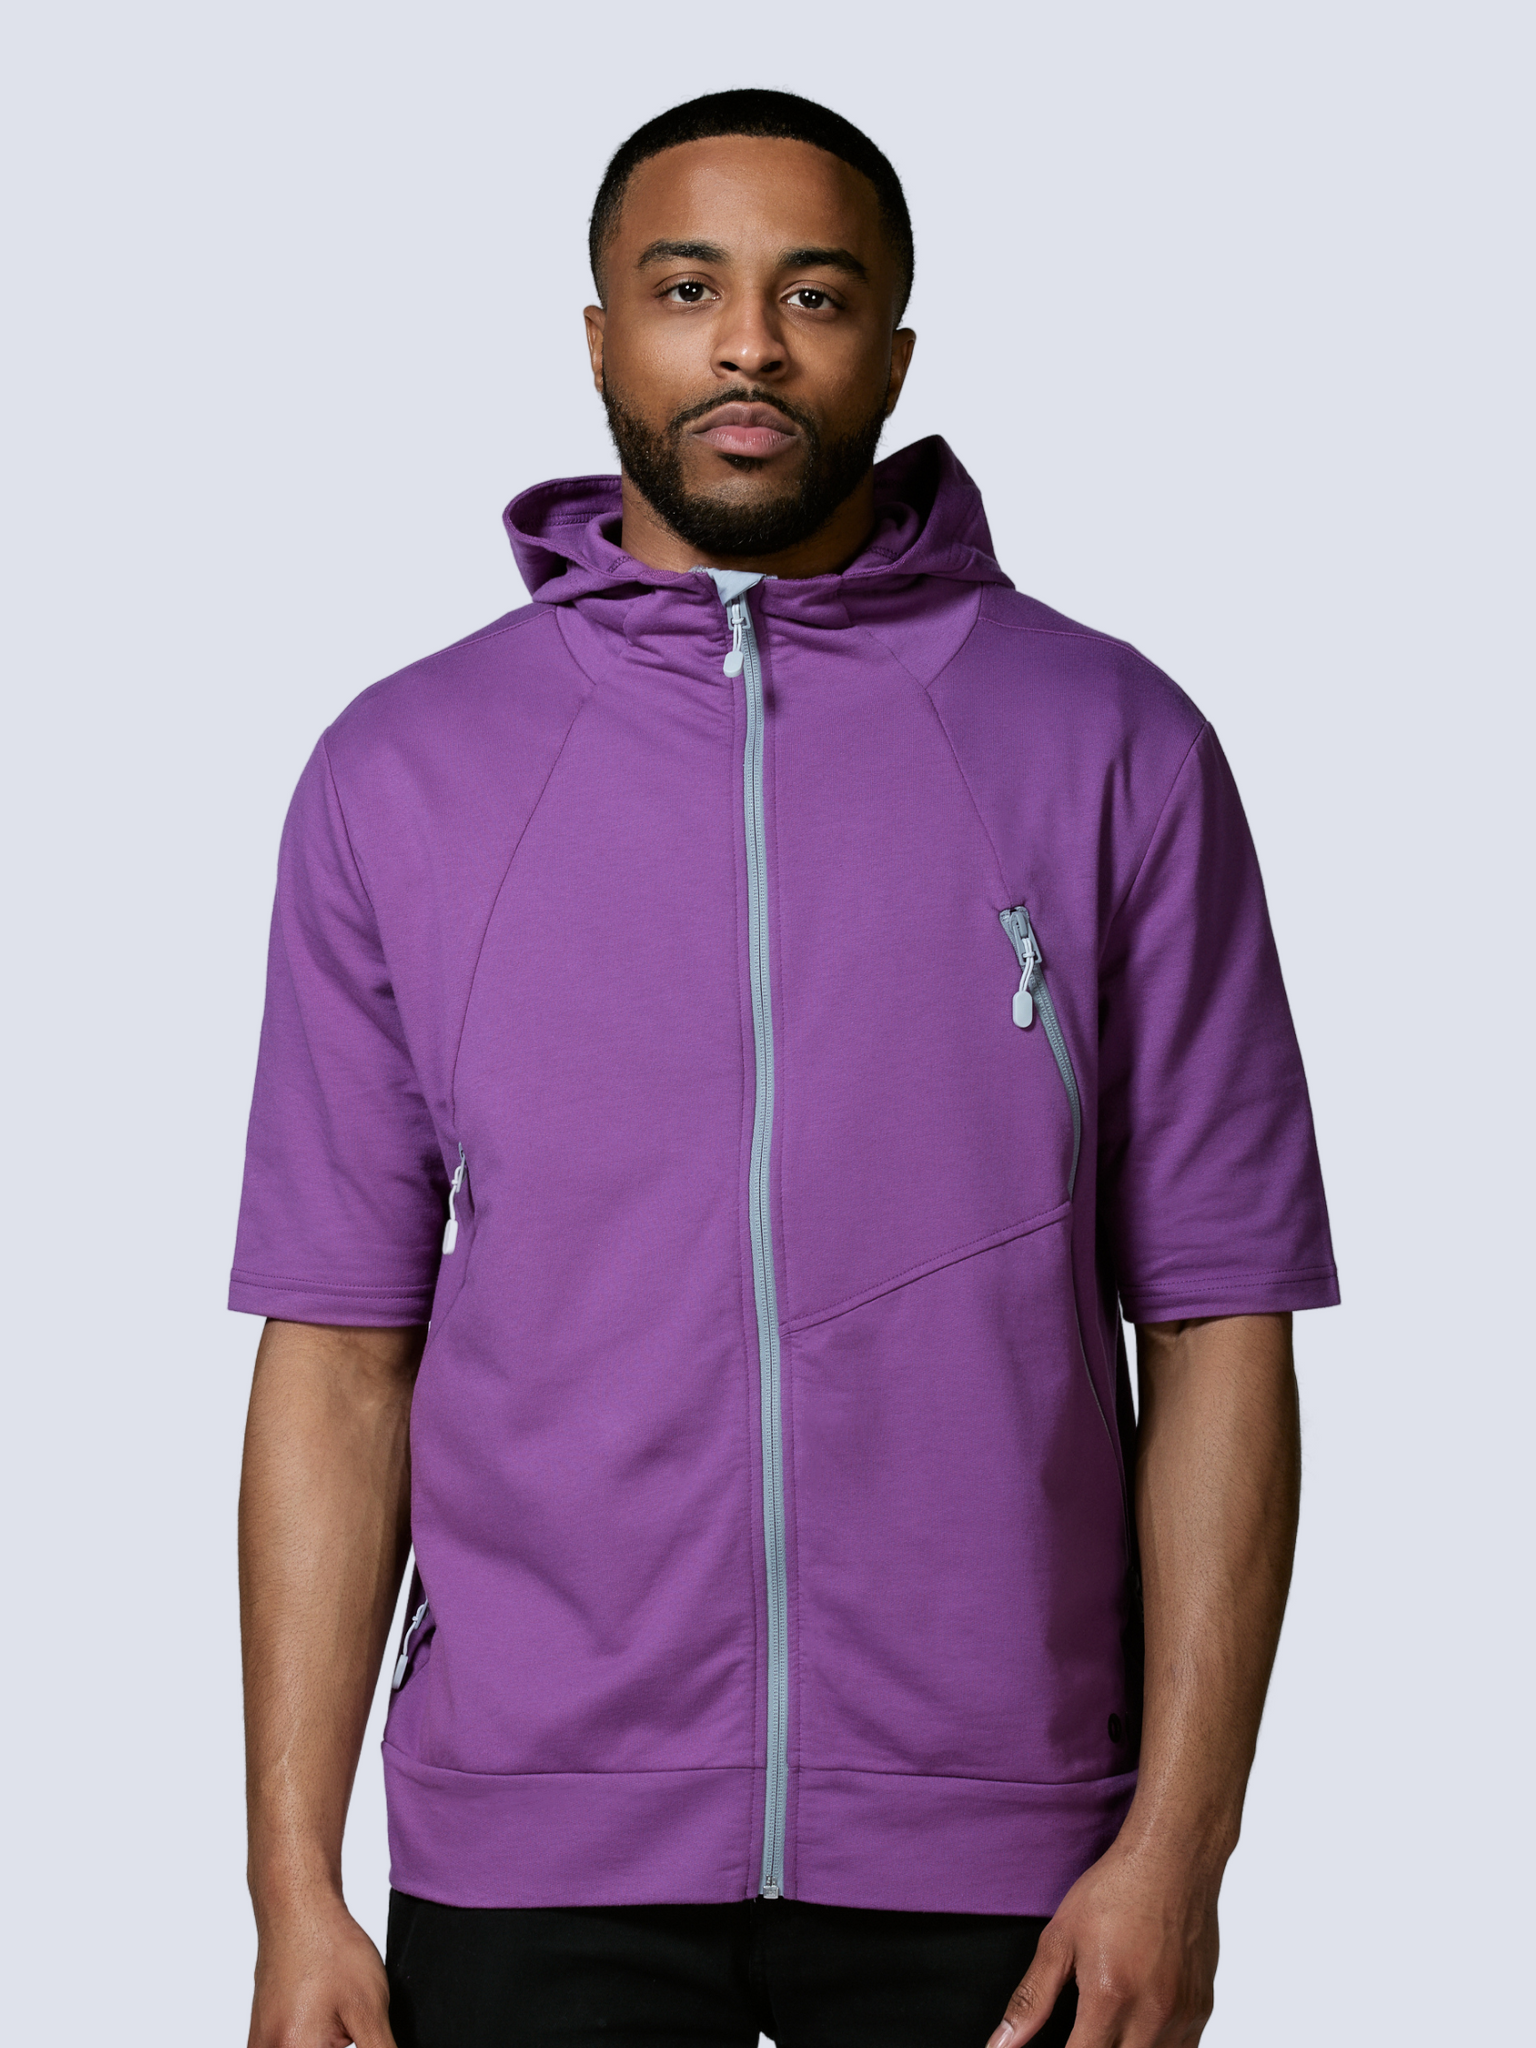 Survive and Conquer Zip Hoodie